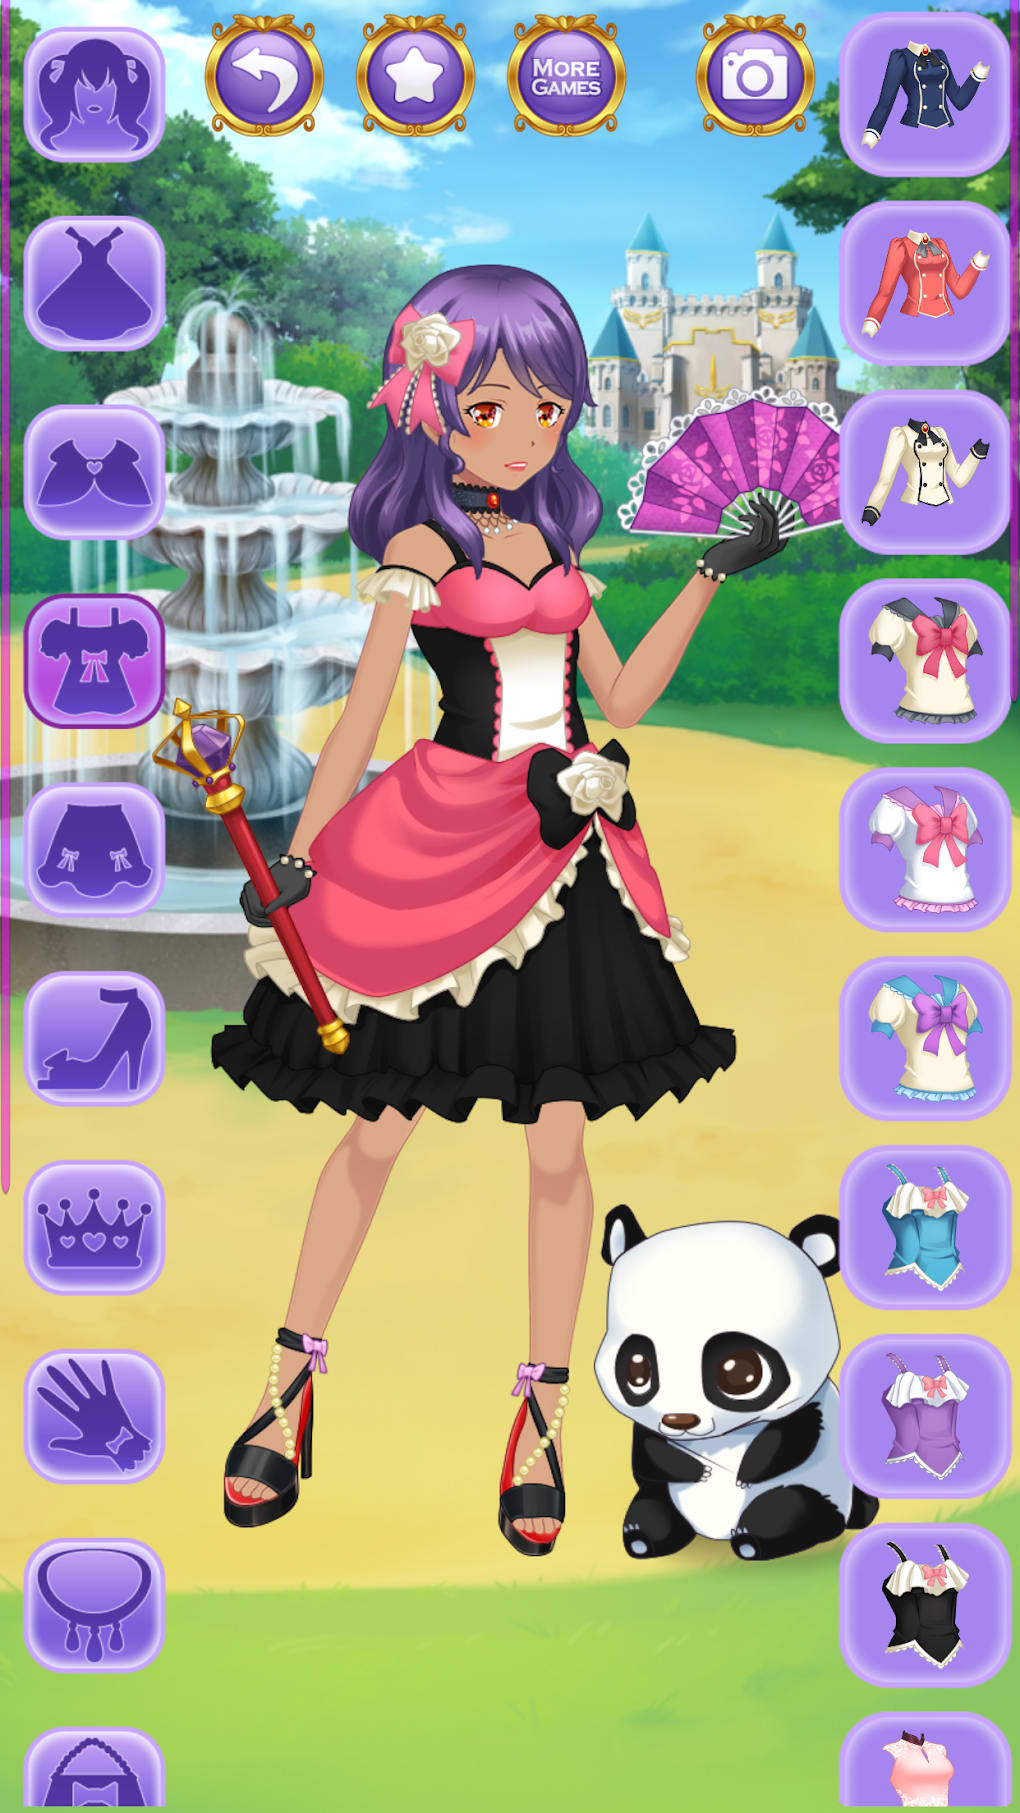 Anime Dress Up Games Online - My Games 4 Girls - HTML5